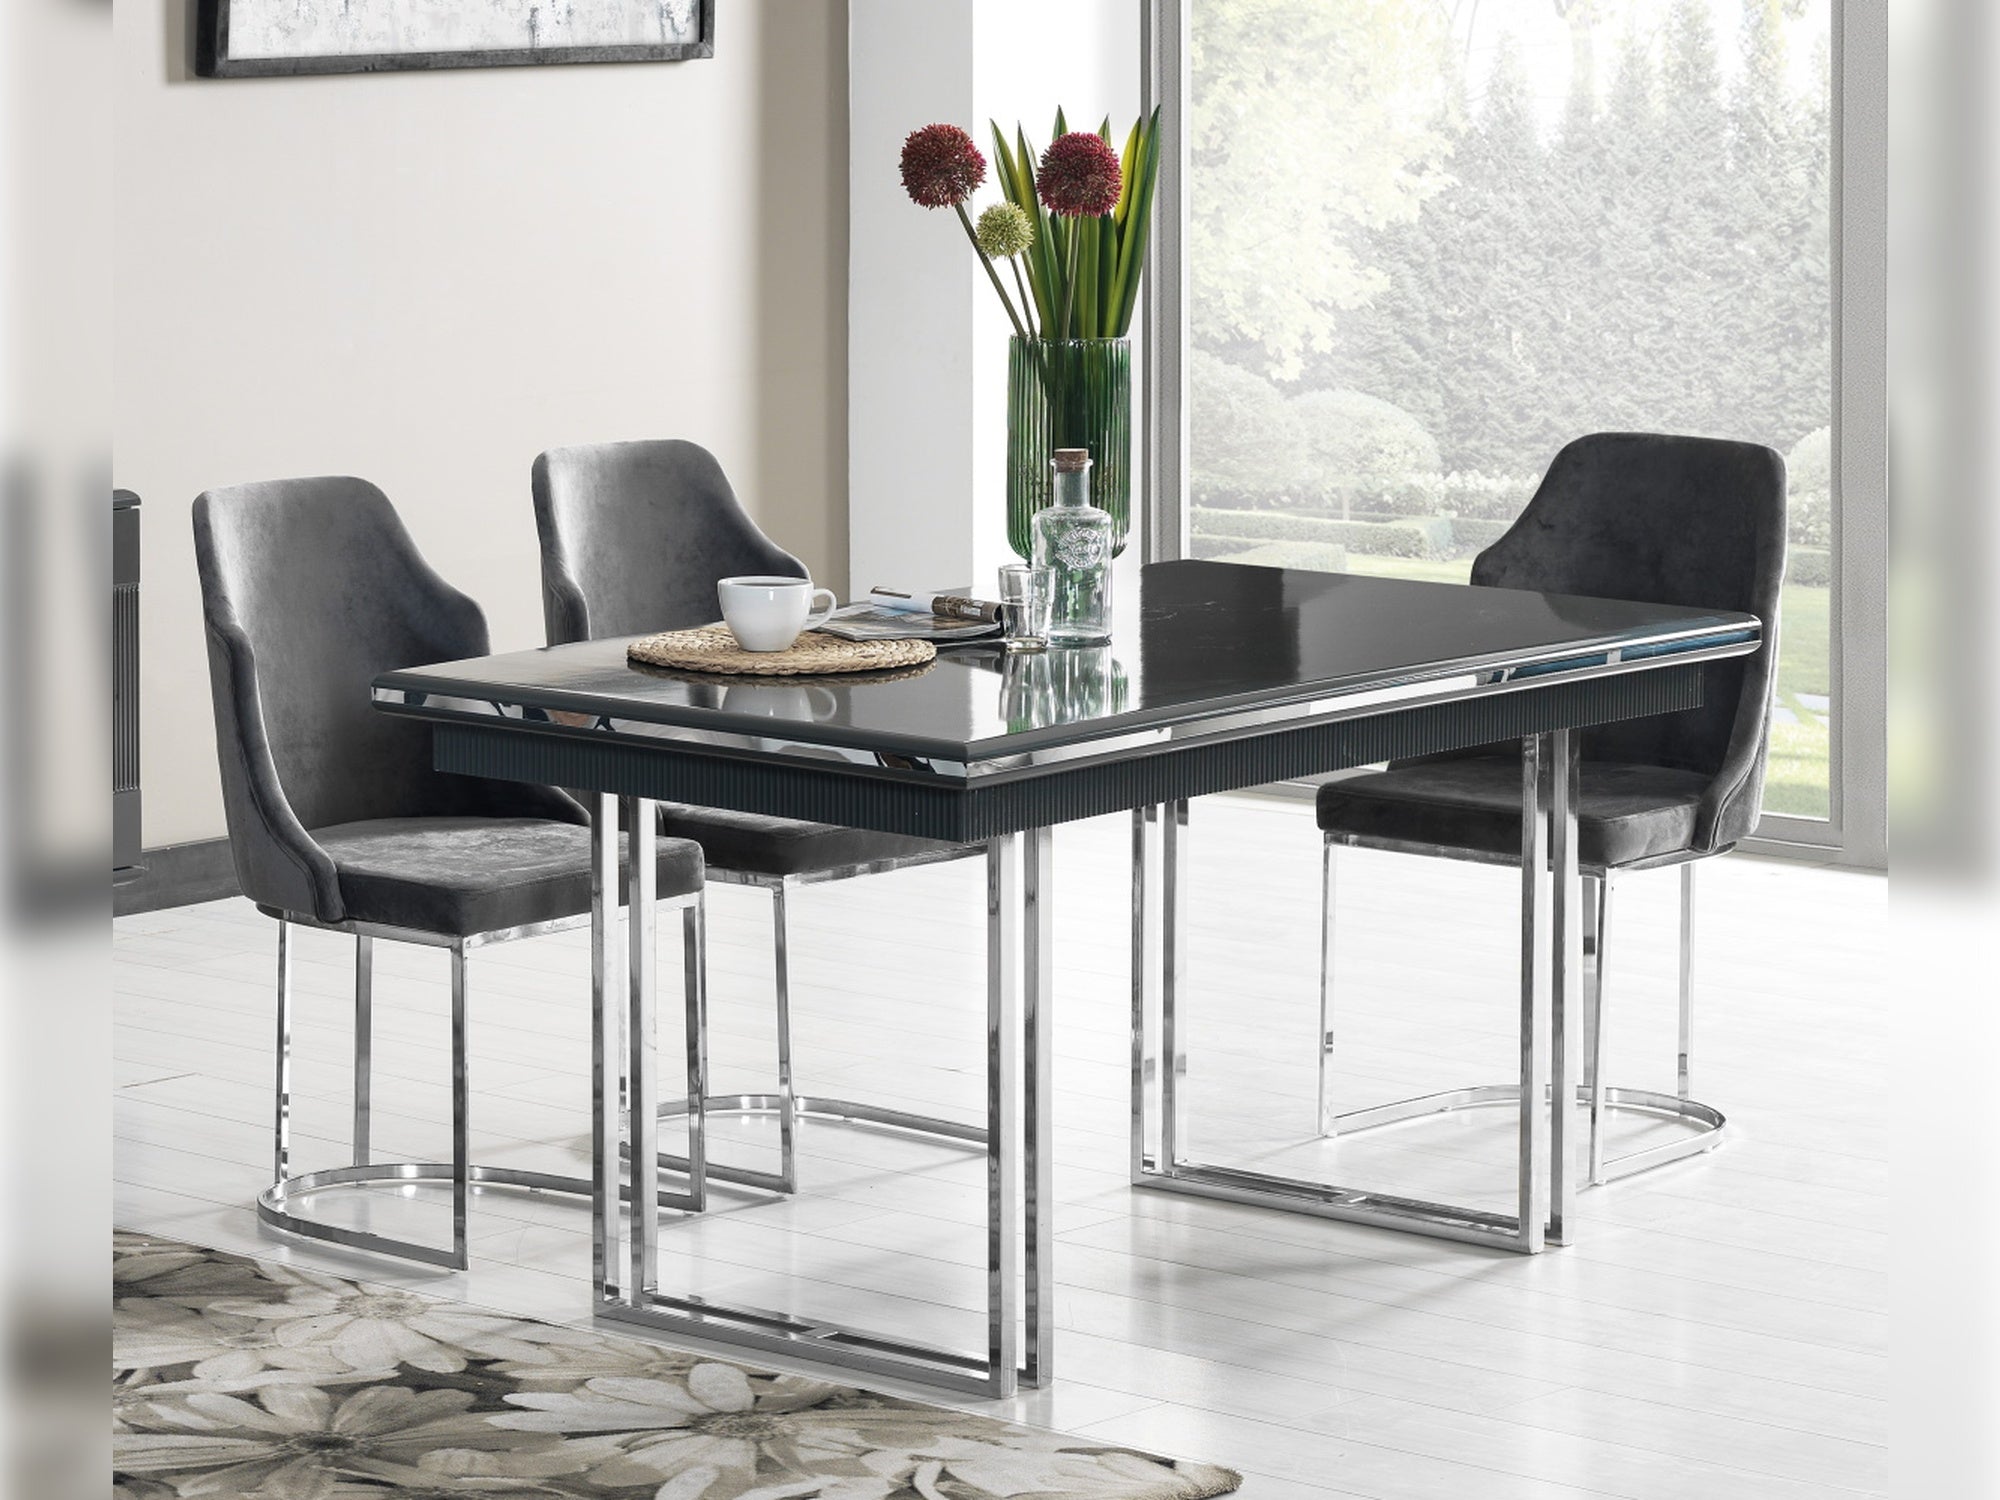 Elips Diningroom Chair Anthracite